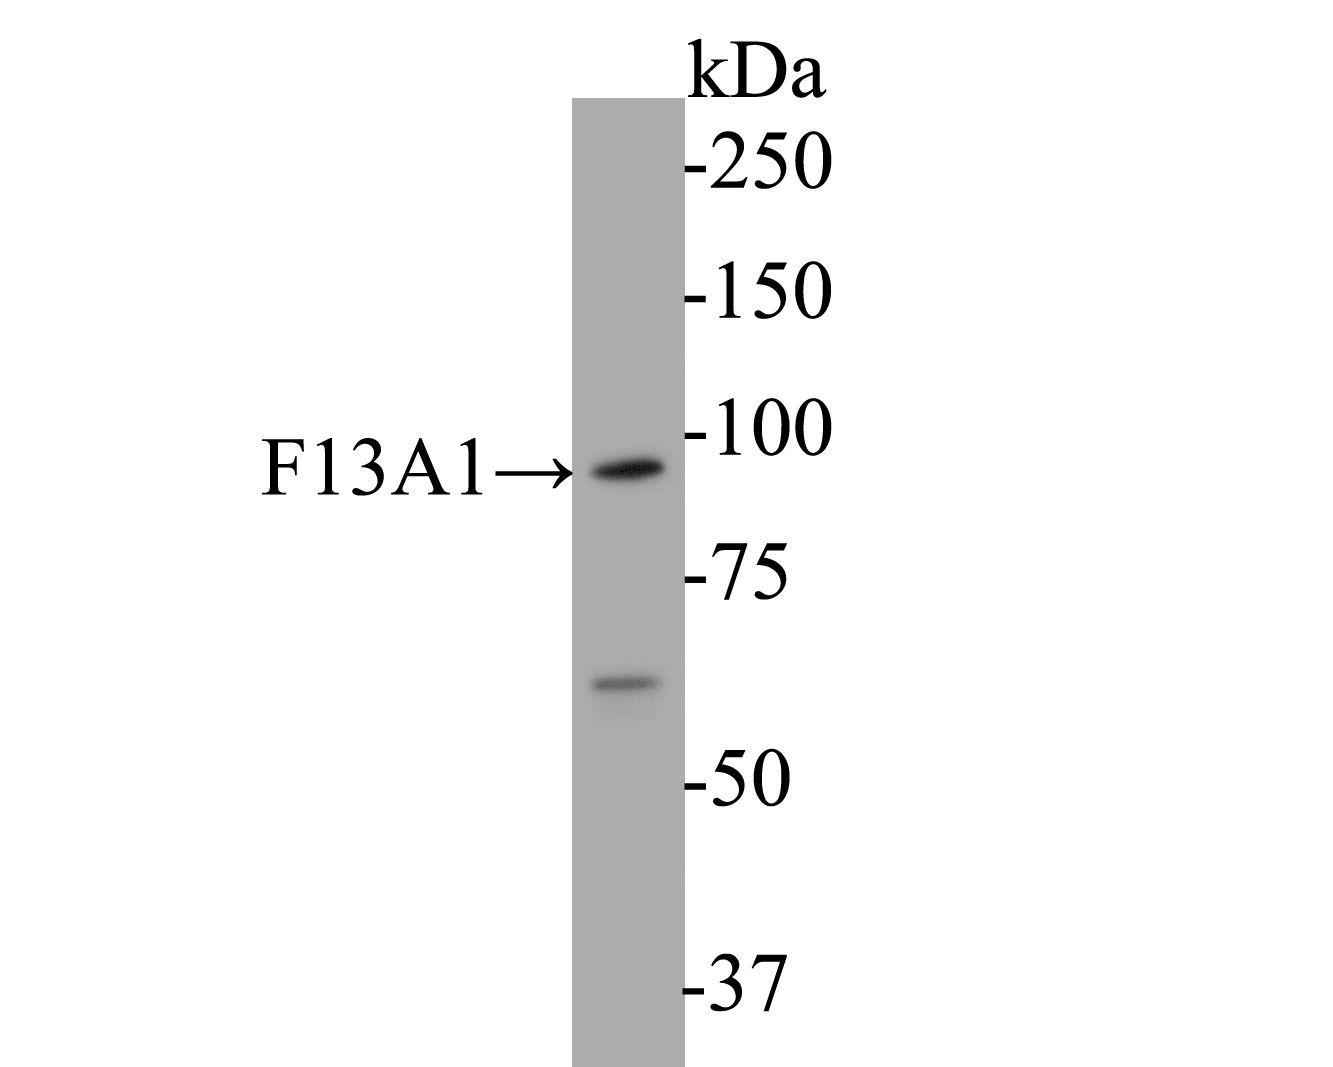 Western blot analysis of F13A1 on human placenta tissue  lysates. Proteins were transferred to a PVDF membrane and blocked with 5% BSA in PBS for 1 hour at room temperature. The primary antibody (EM1901-38, 1/500) was used in 5% BSA at room temperature for 2 hours. Goat Anti-Mouse IgG - HRP Secondary Antibody (HA1006) at 1:5,000 dilution was used for 1 hour at room temperature.